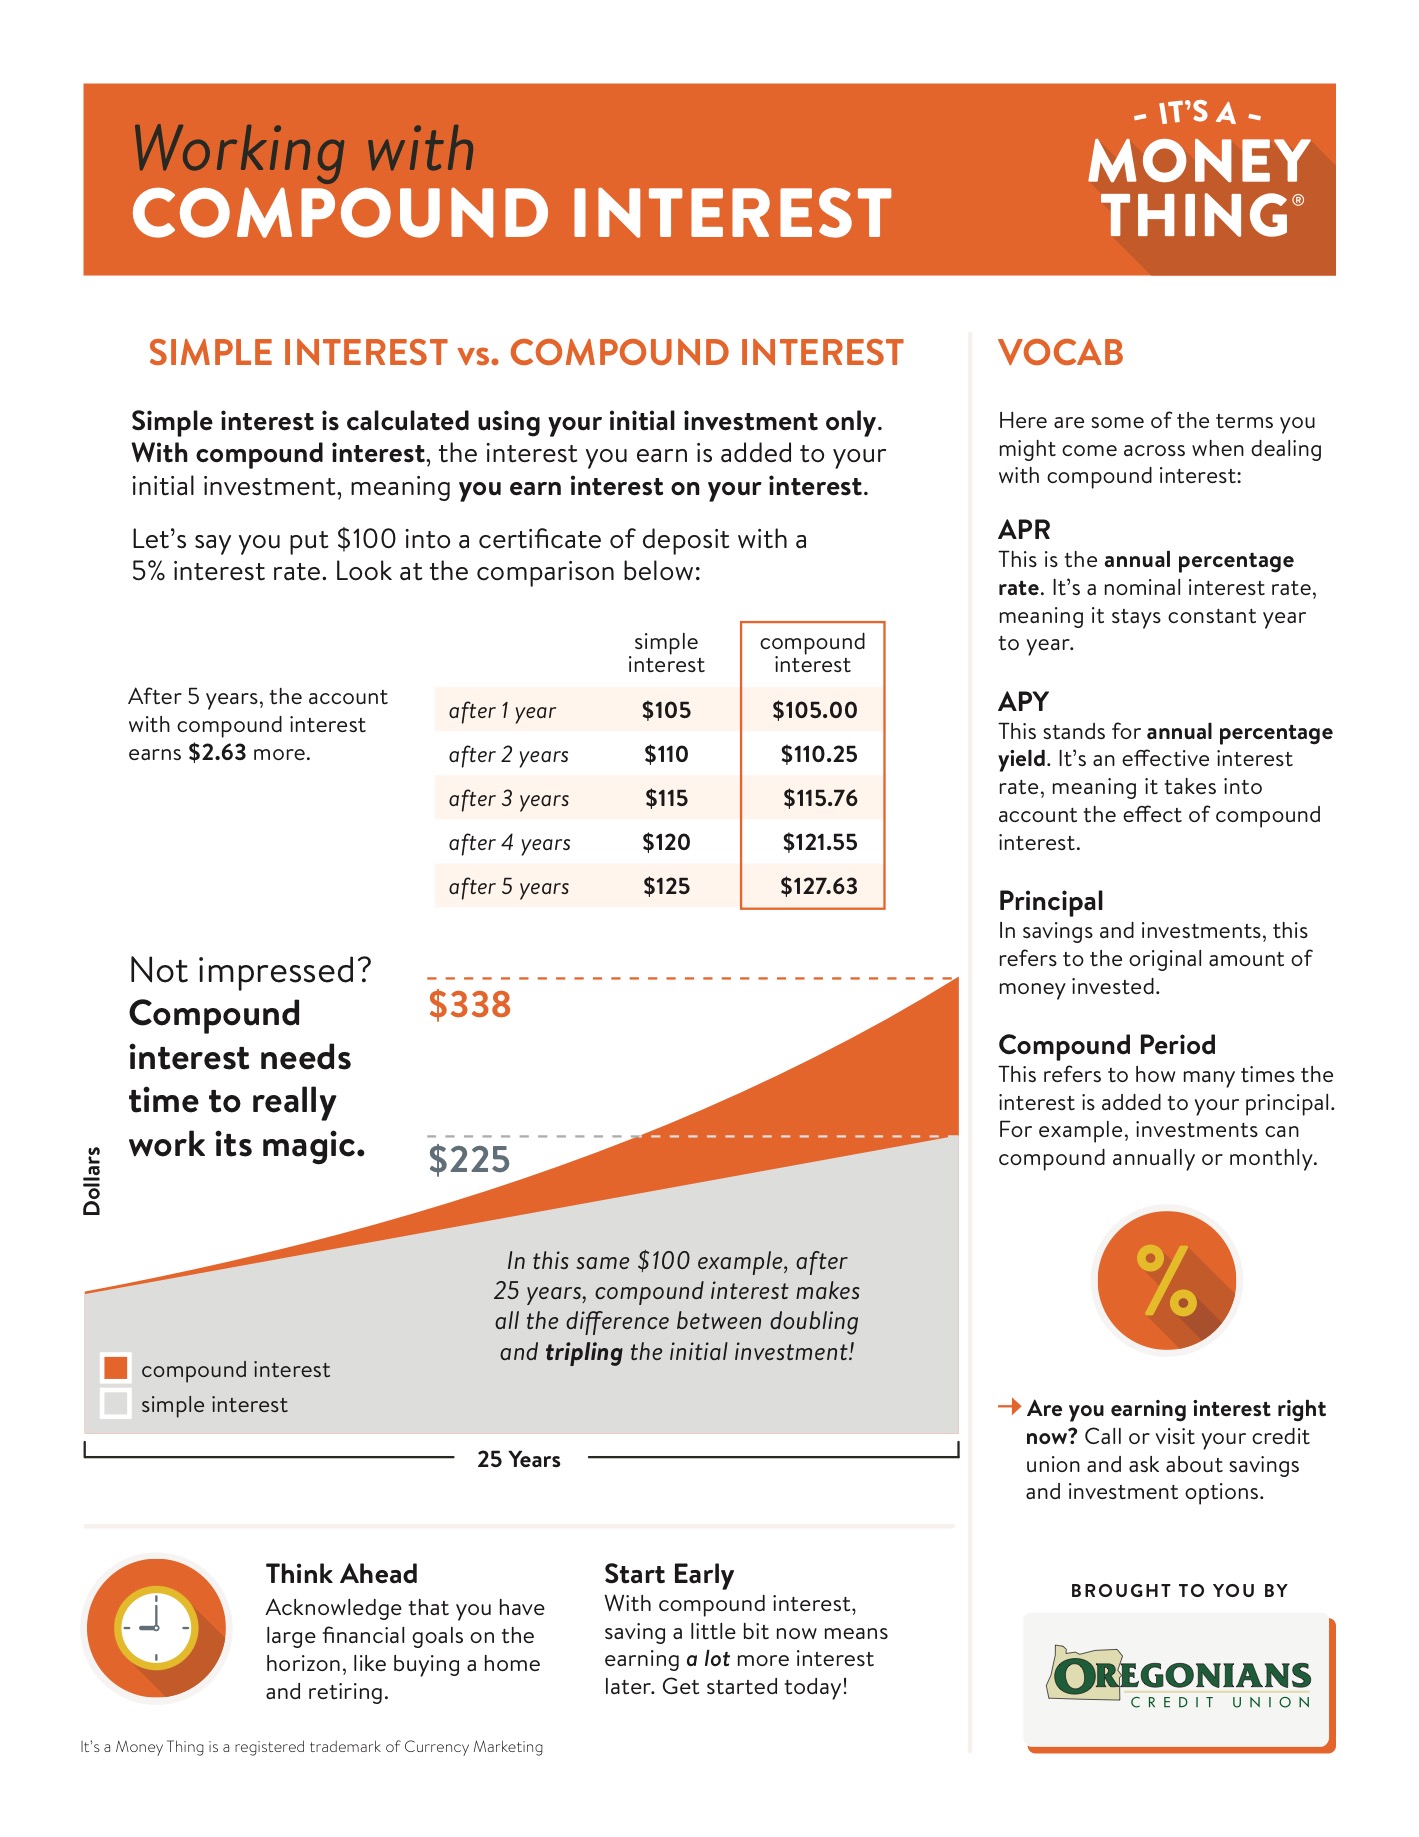 Working with compound interest - handout